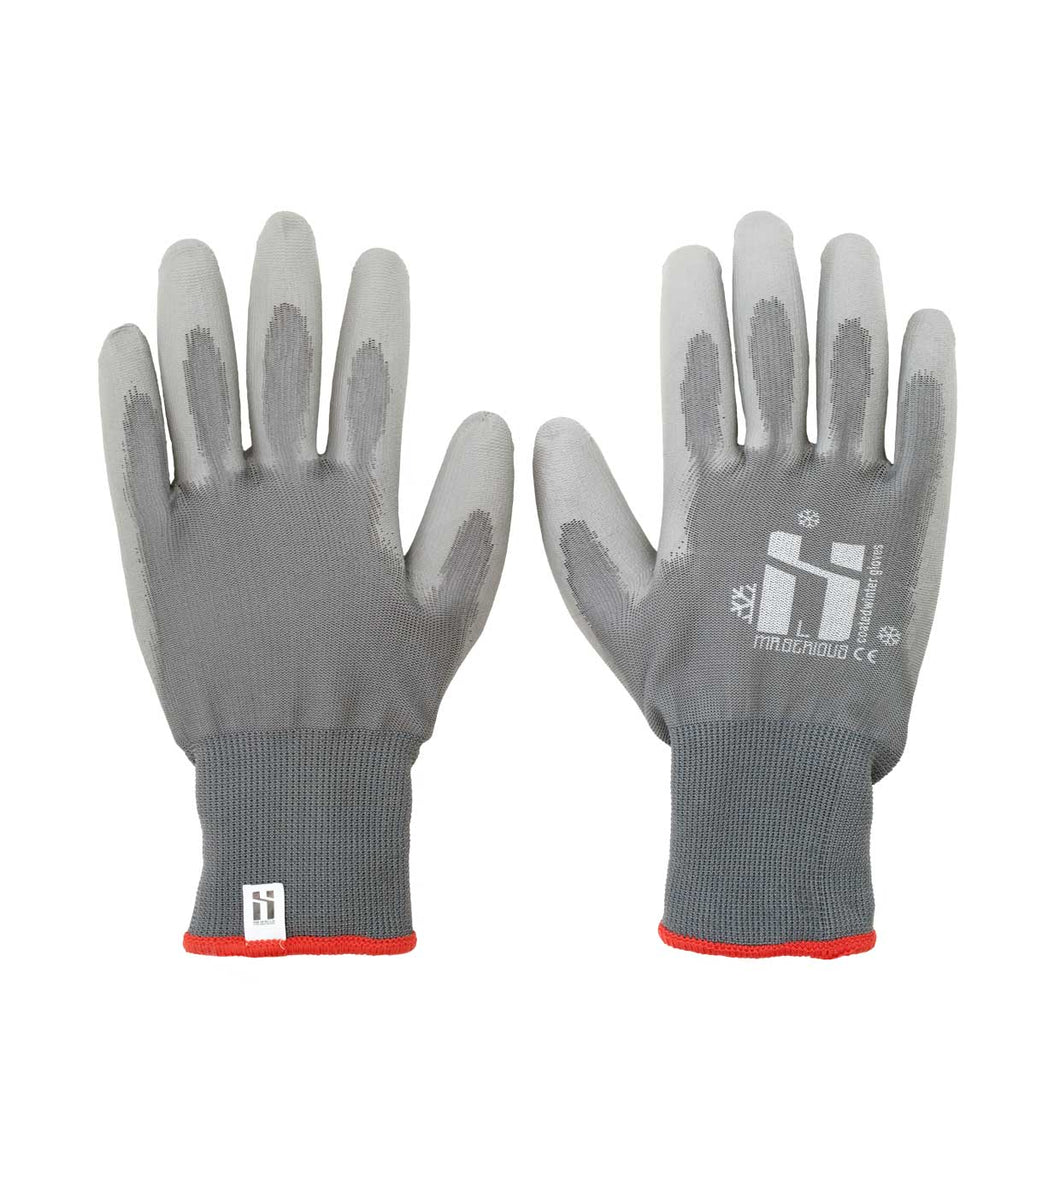 Mr. Serious - PU Coated Winter Gloves